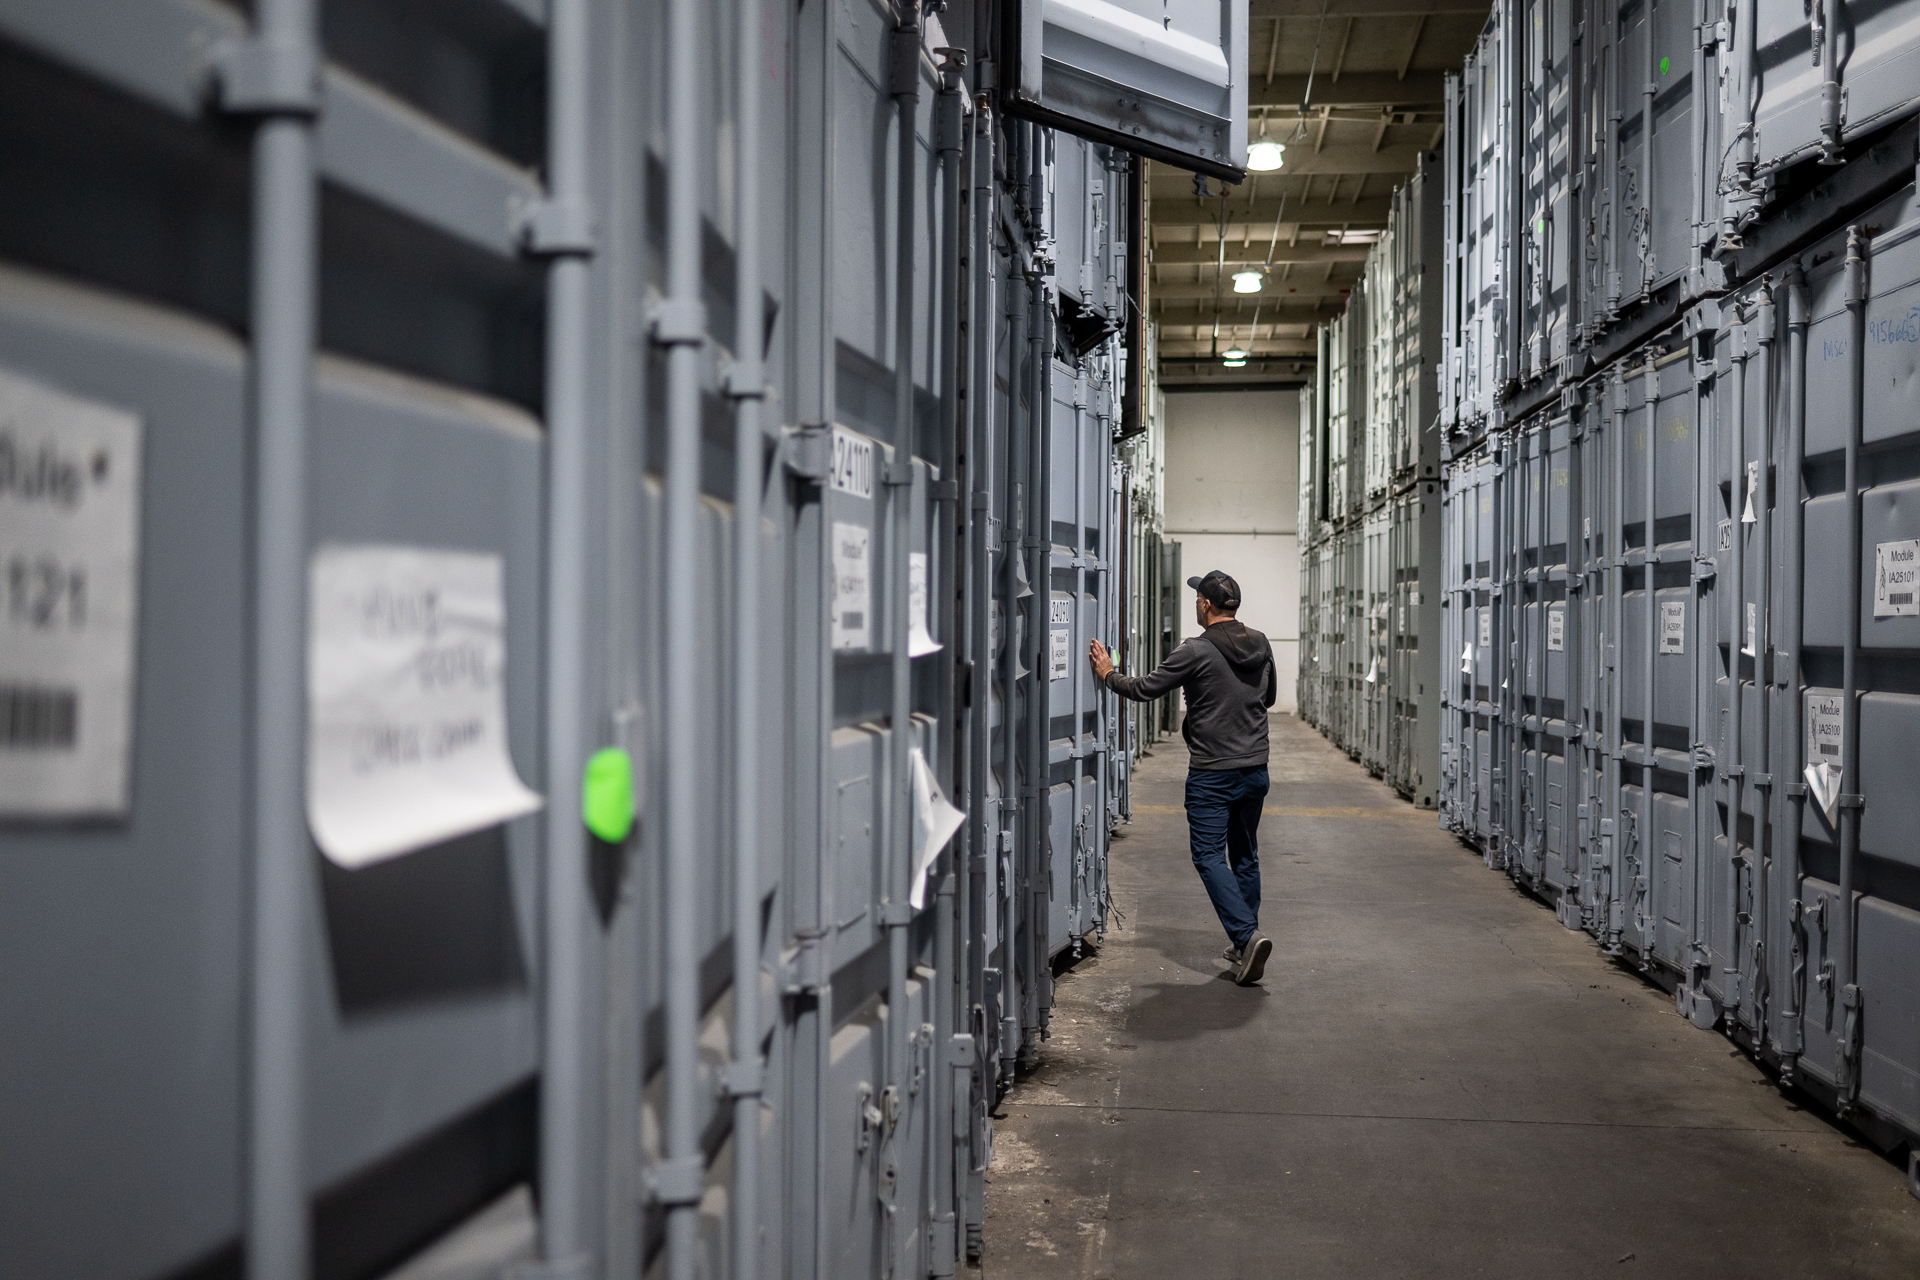 A man in the distance stands in a walkway between two huge walls of grey storage containers stacked on top of each other inside what appears to be a massive warehouse